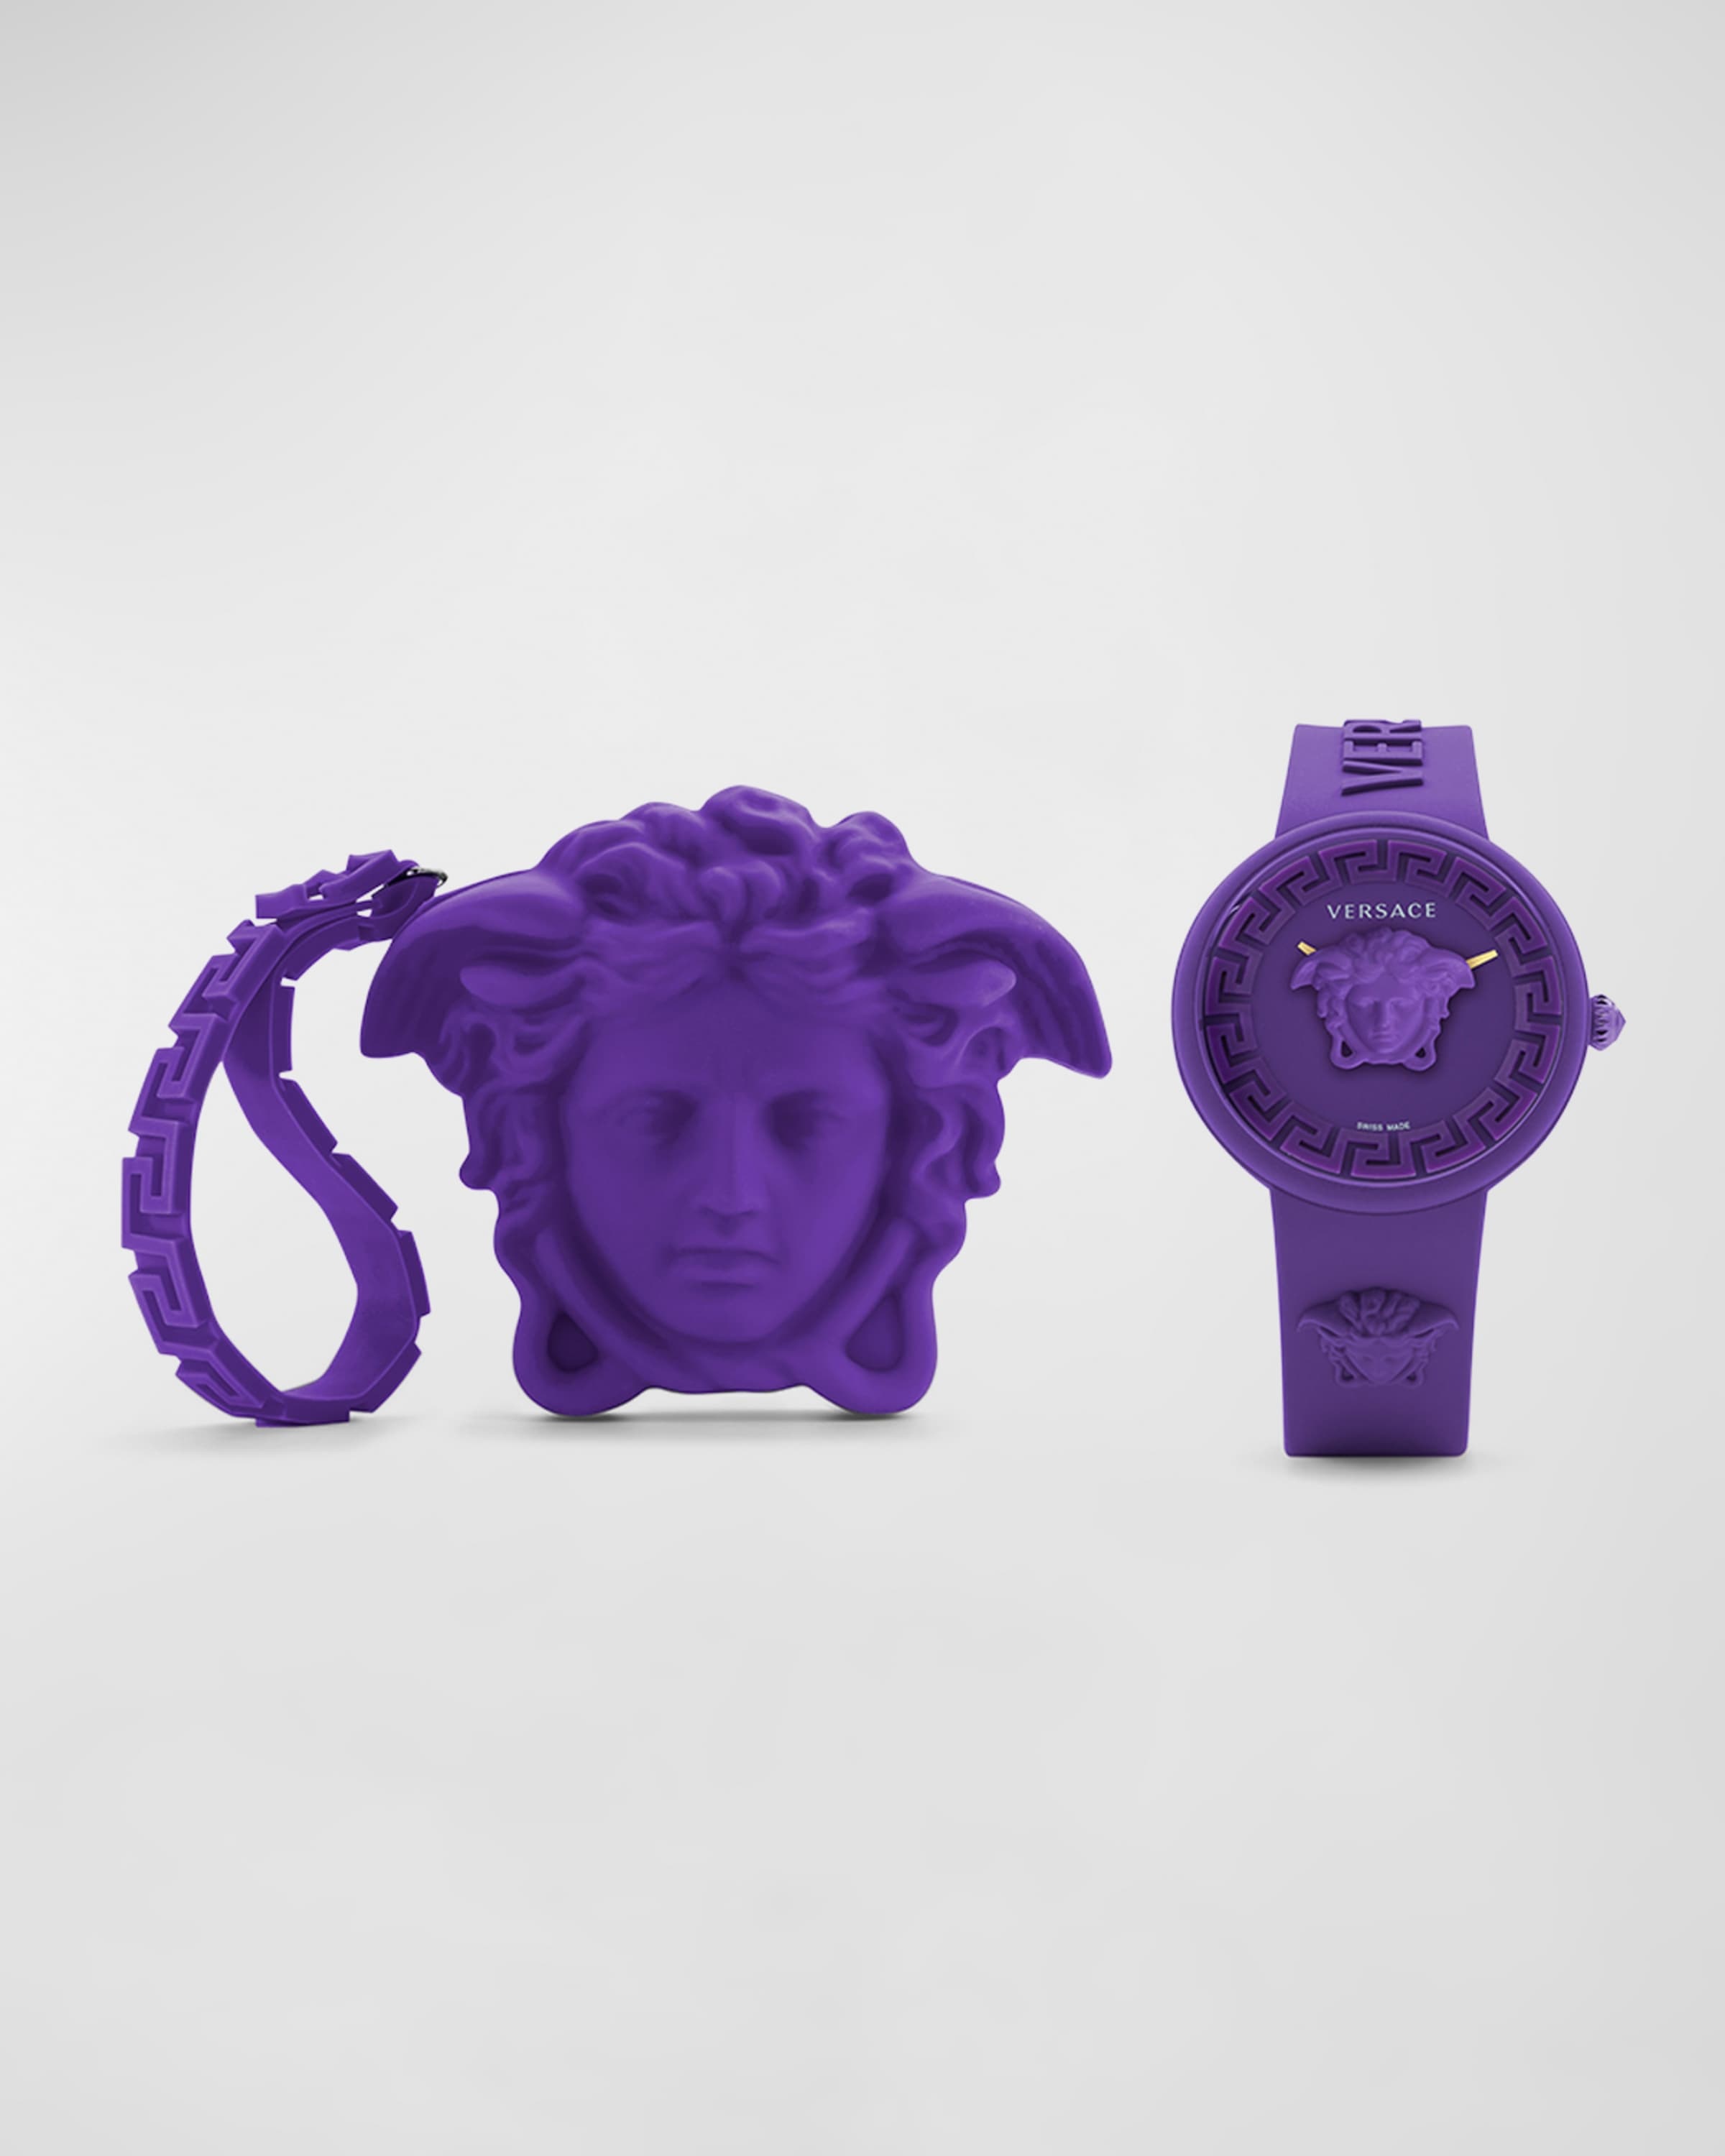 39mm Medusa Pop Watch with Silicone Strap and Matching Case, Purple - 5